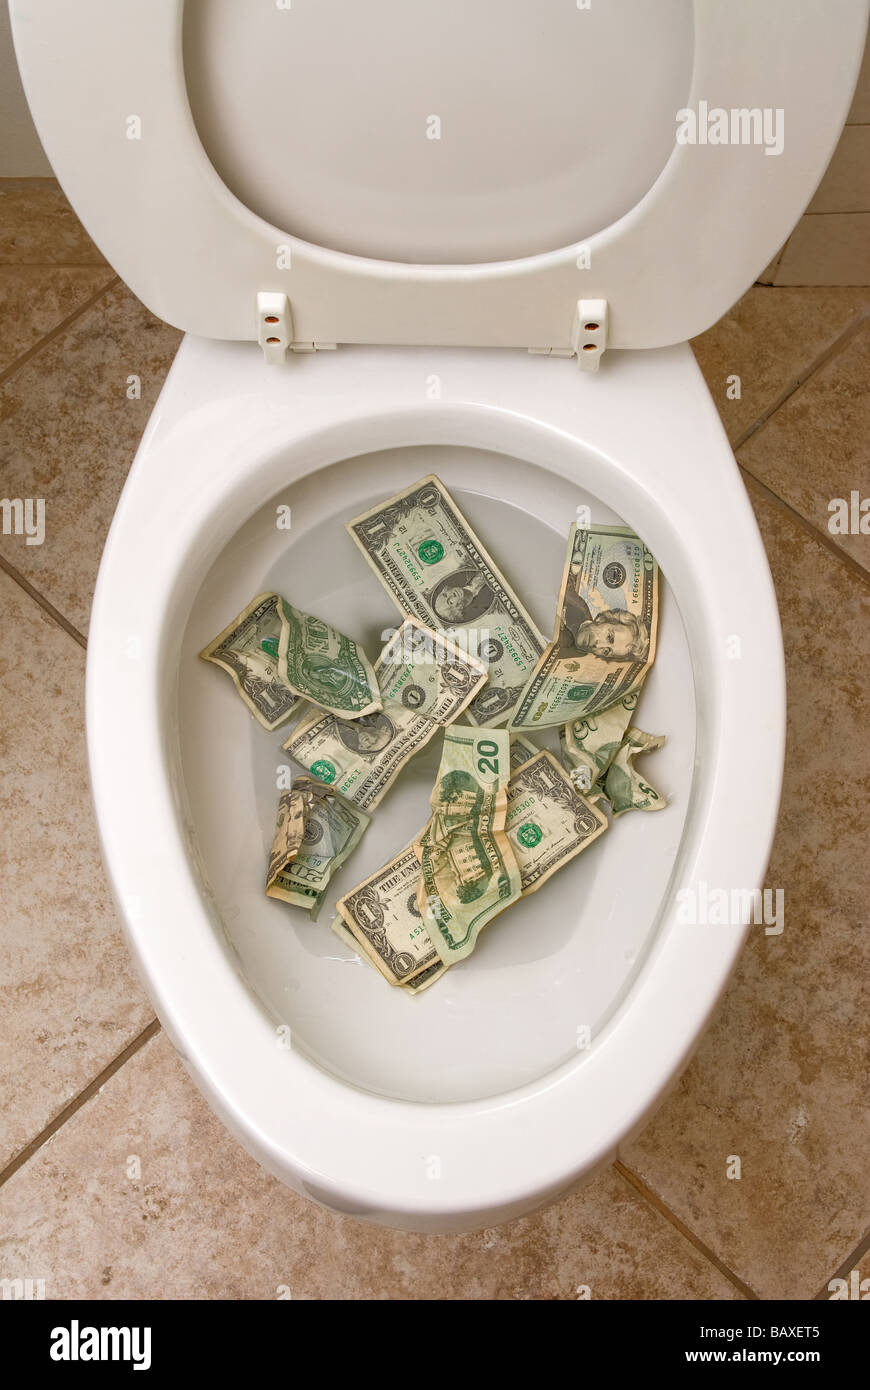 A pile of money getting ready to be flushed down the toilet Stock Photo